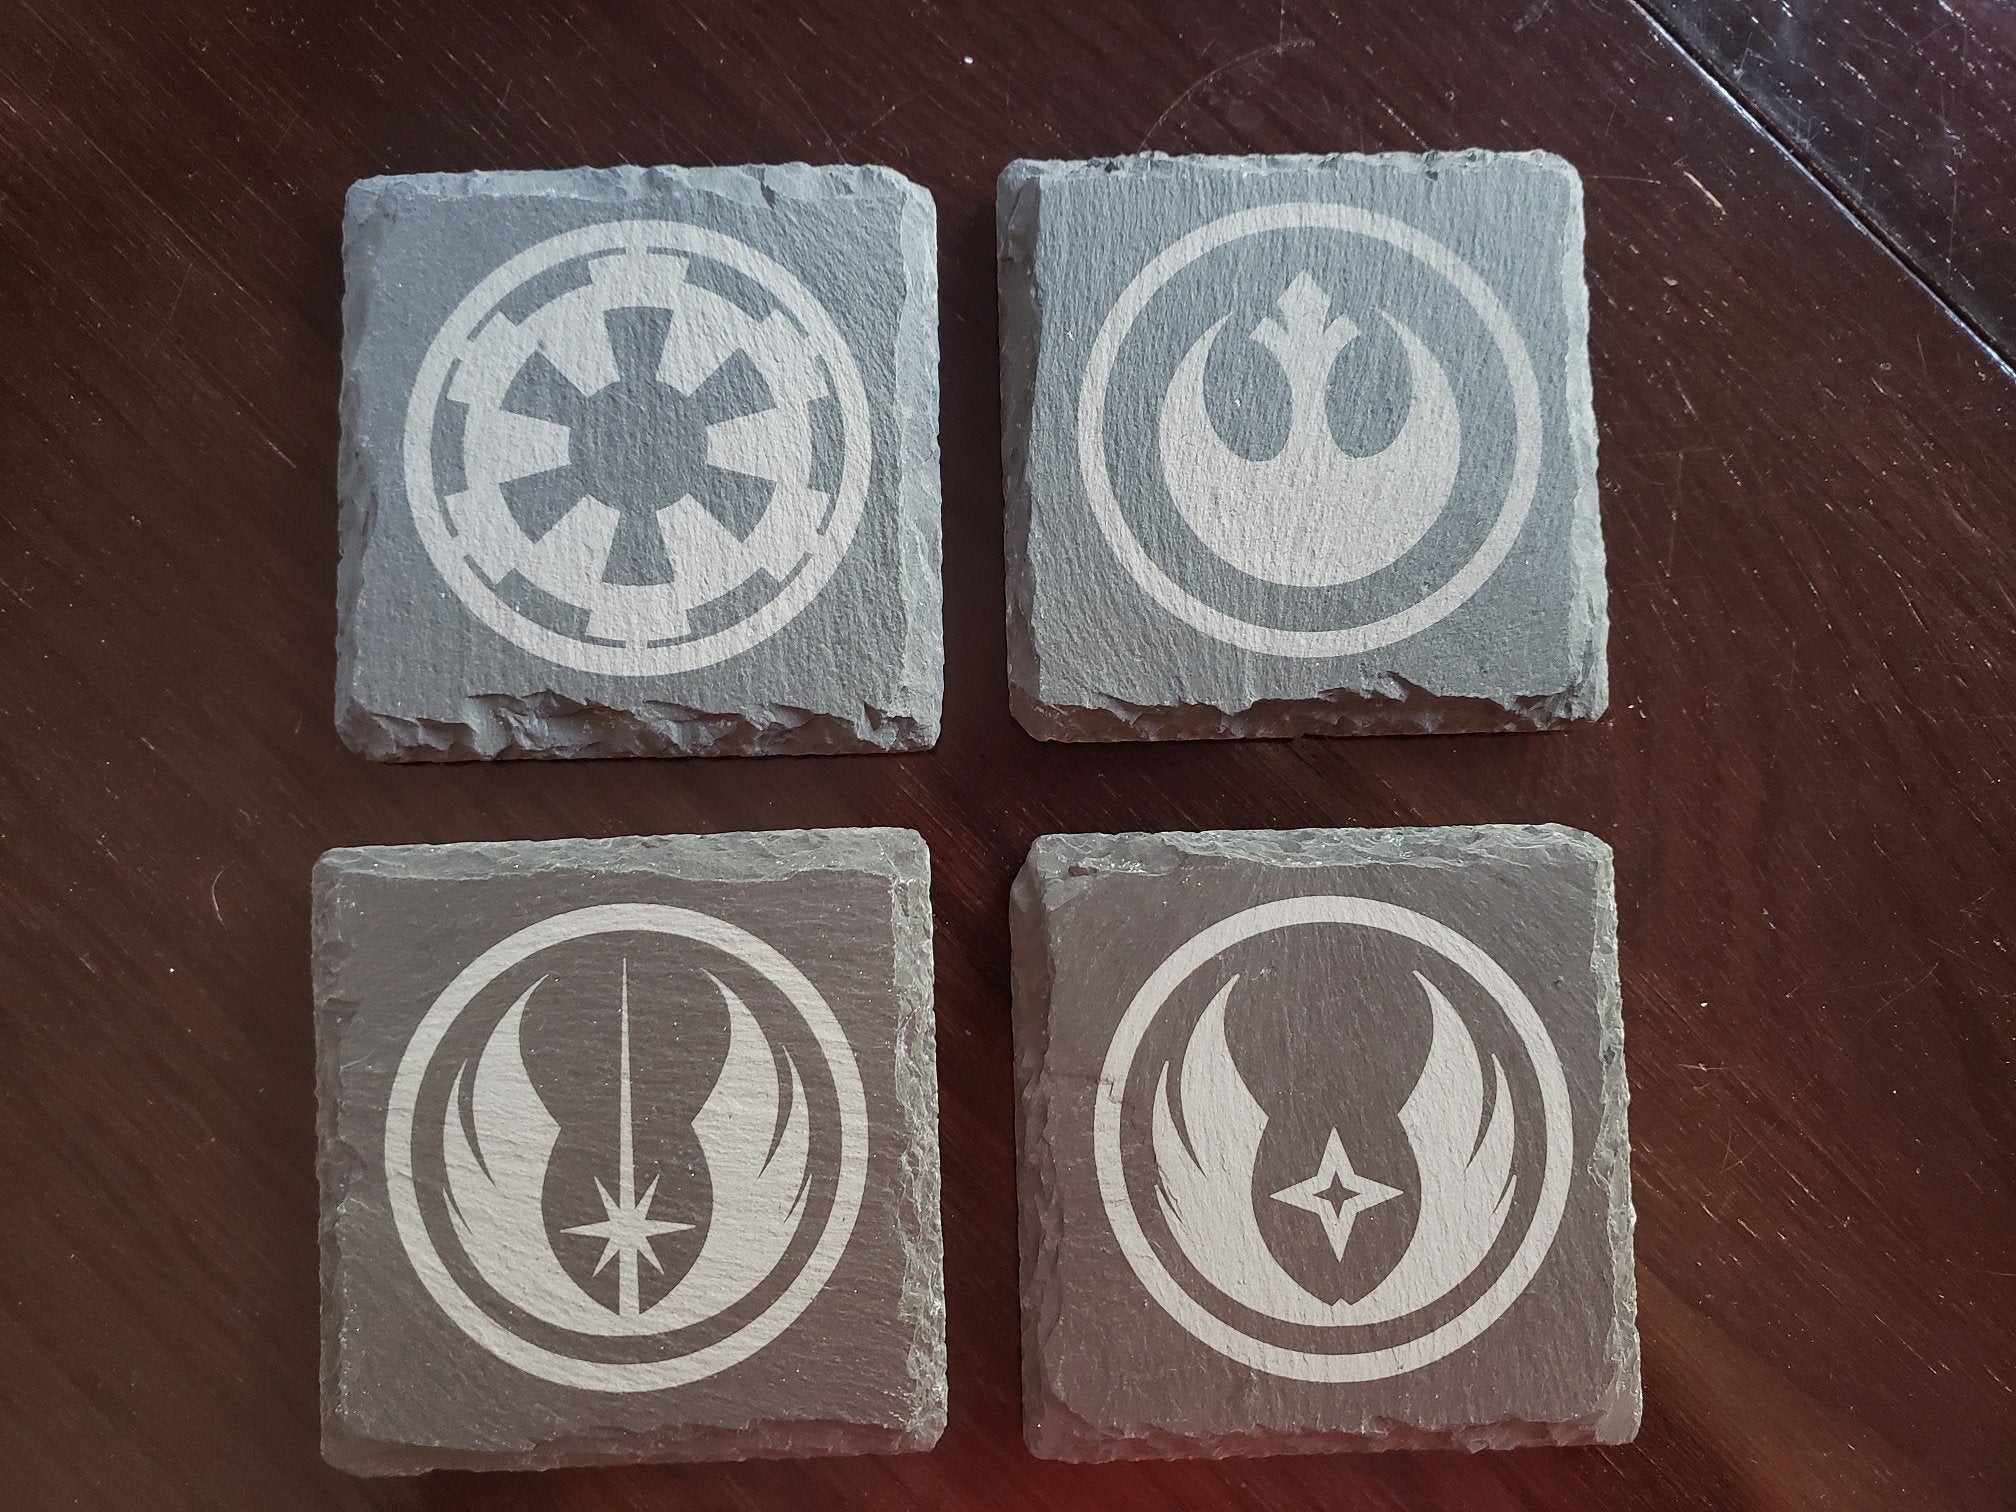 Star Wars Glass Coasters Set 4-Pack - Entertainment Earth